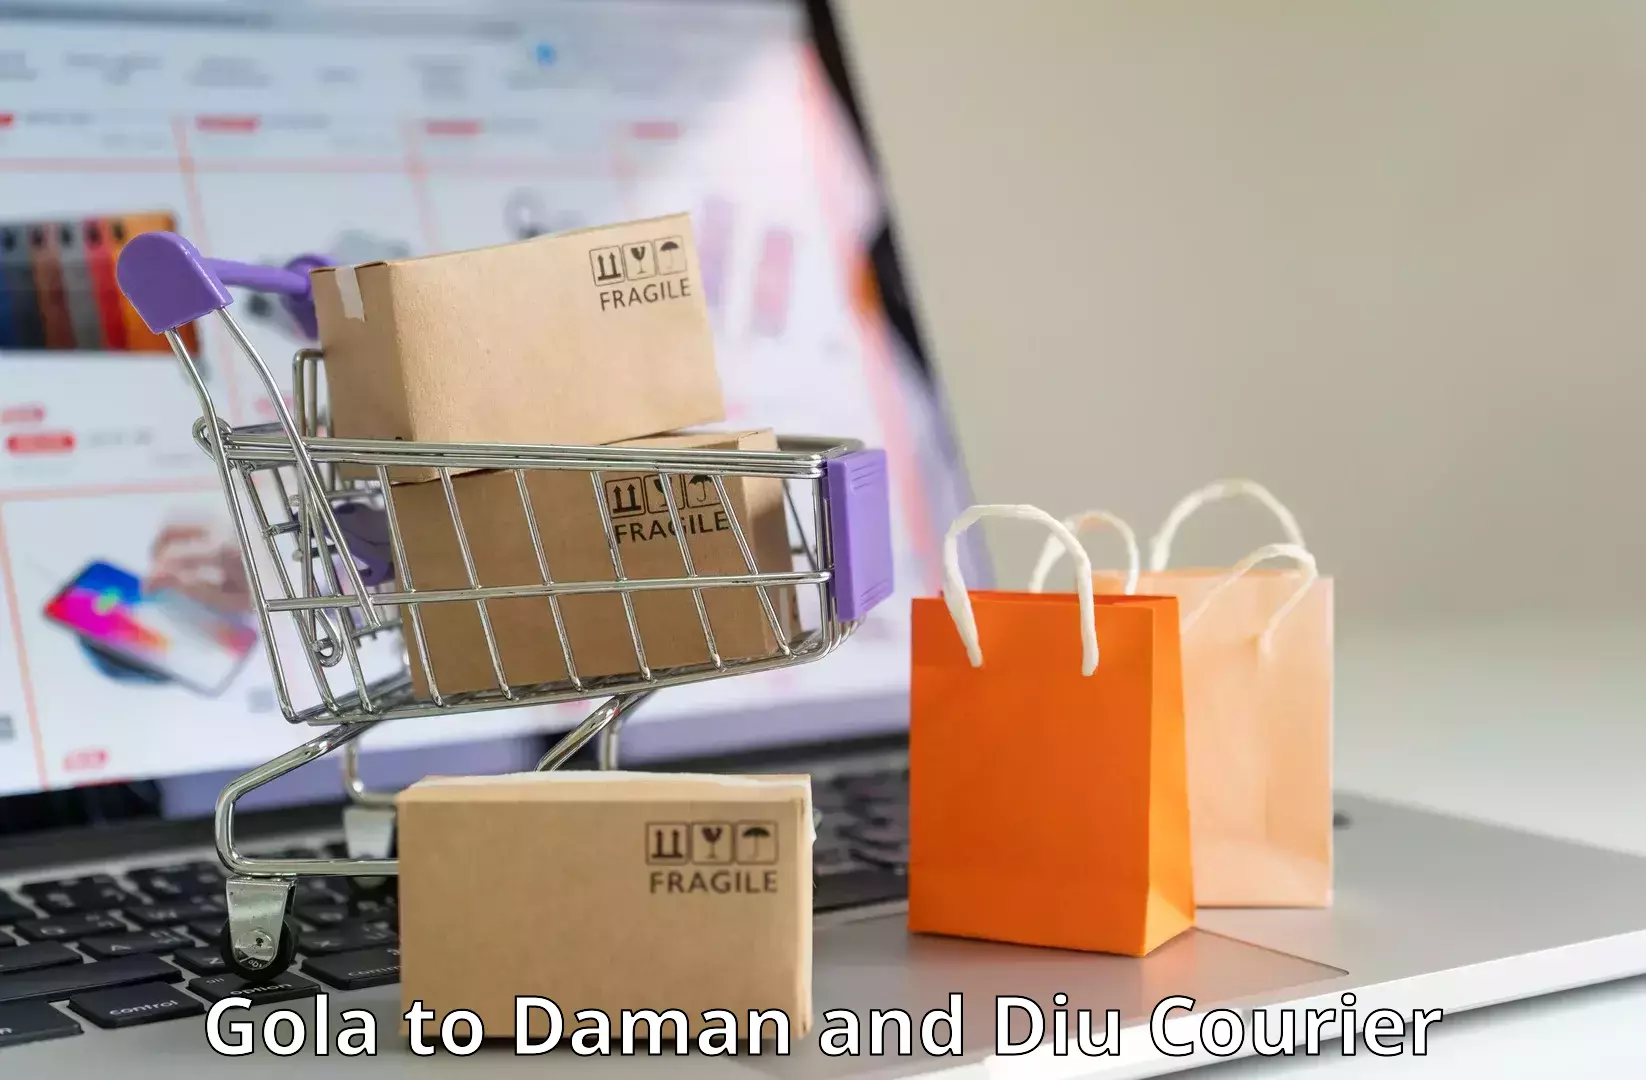 Global parcel delivery Gola to Daman